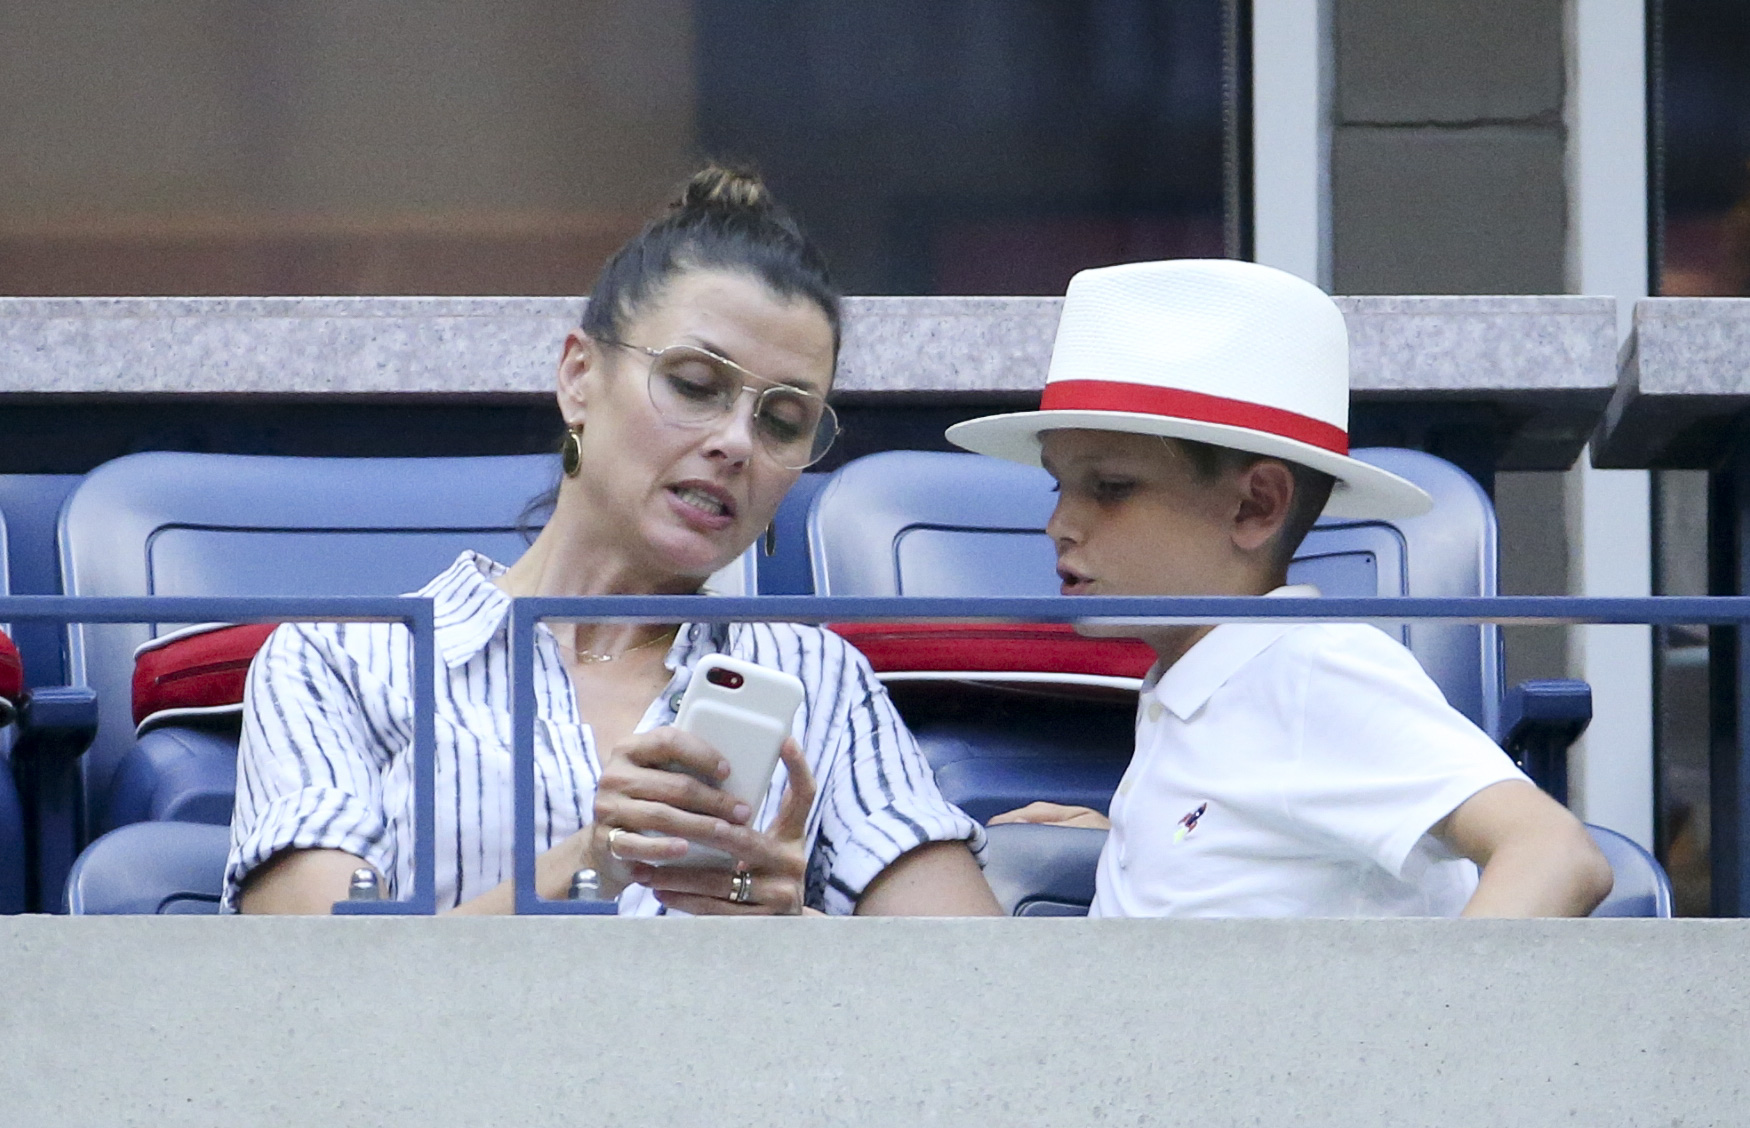 Bridget Moynahan and her son at the USTA Billie Jean King National Tennis Center in New York City on August 29, 2018 | Source: Getty Images